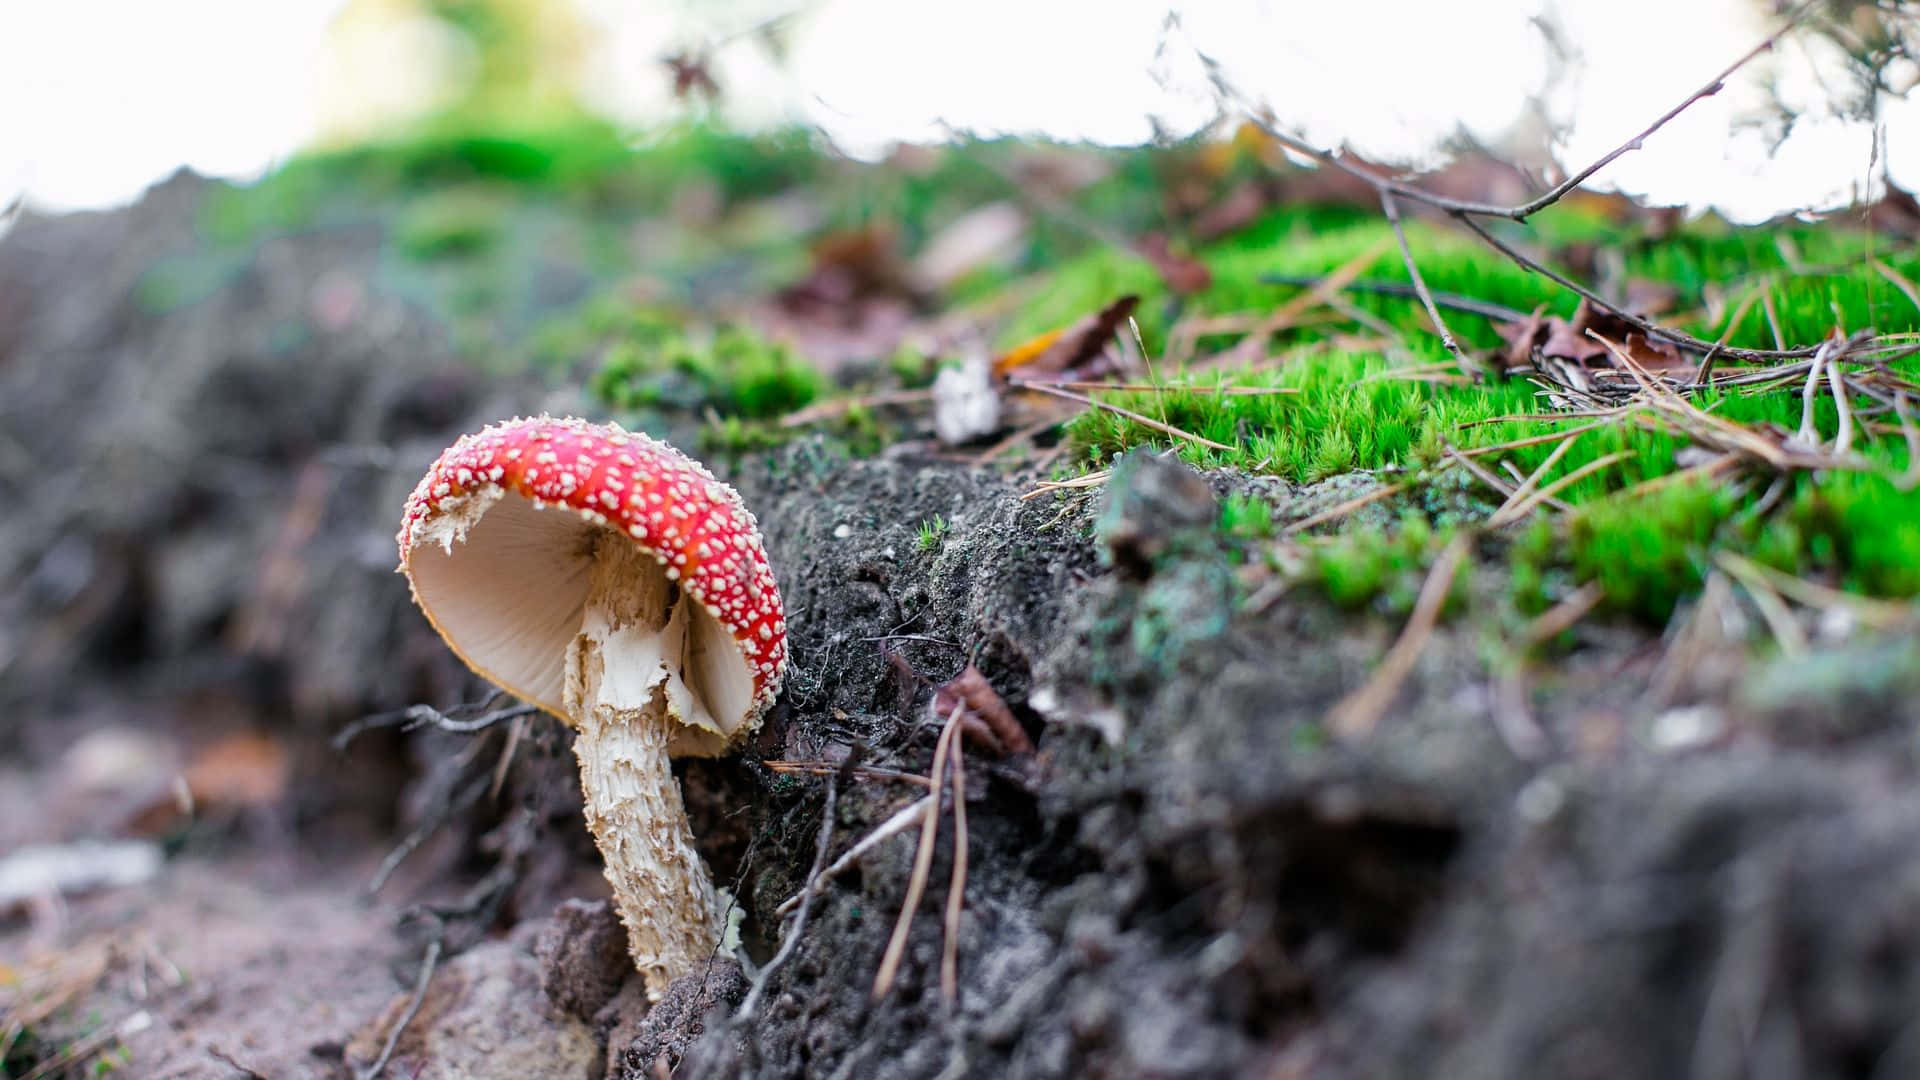 Fly Agaric Fungus On Damp Soil With Moss Wallpaper